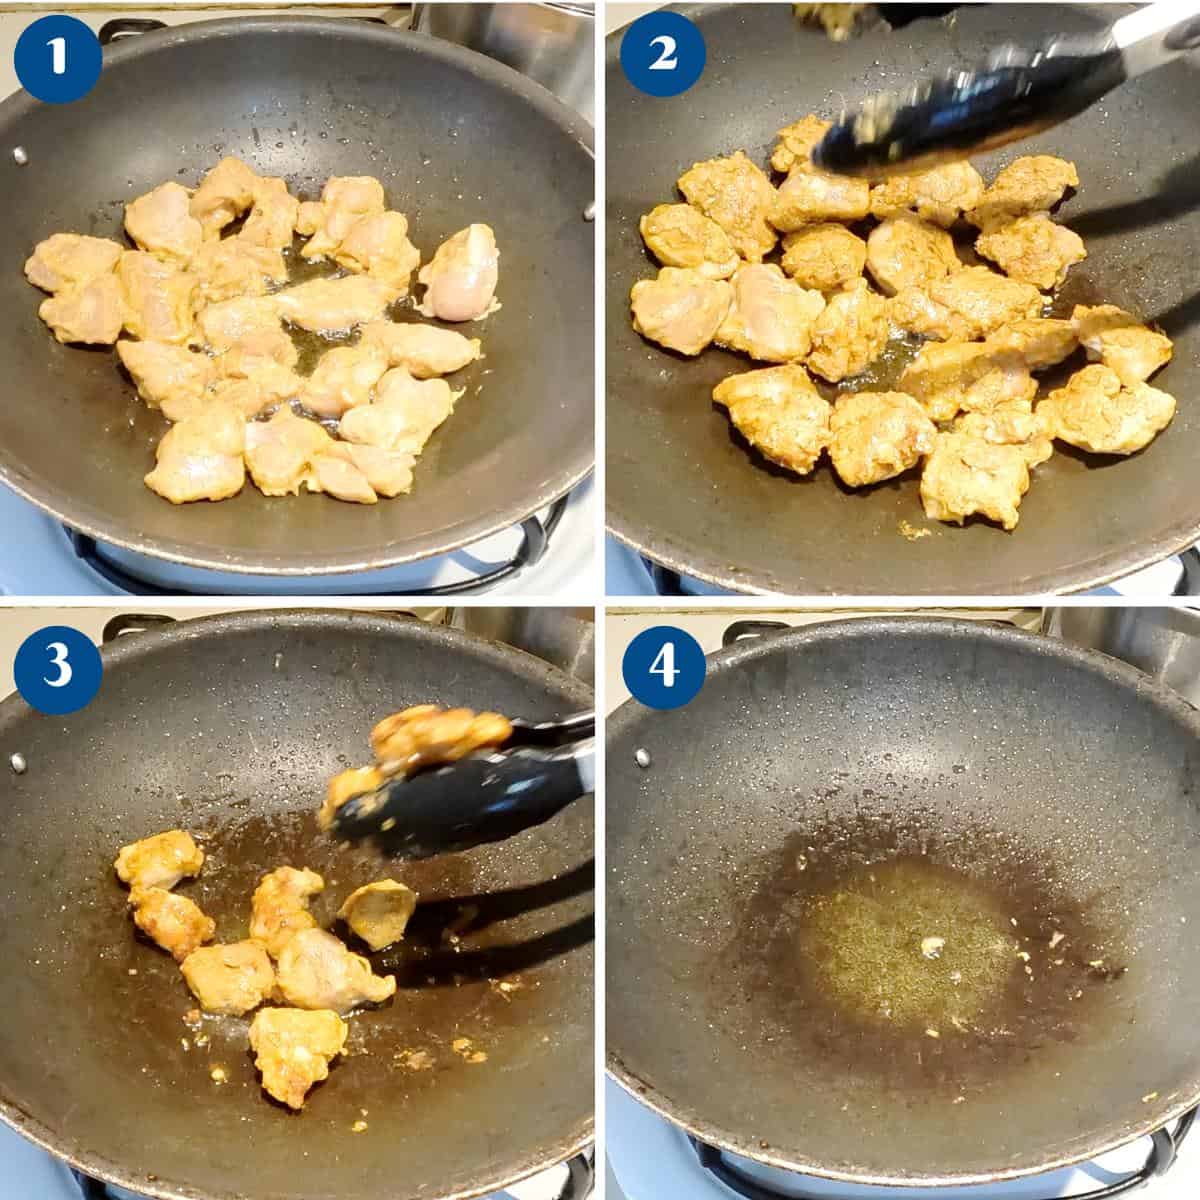 Progress pictures pay frying the chicken.